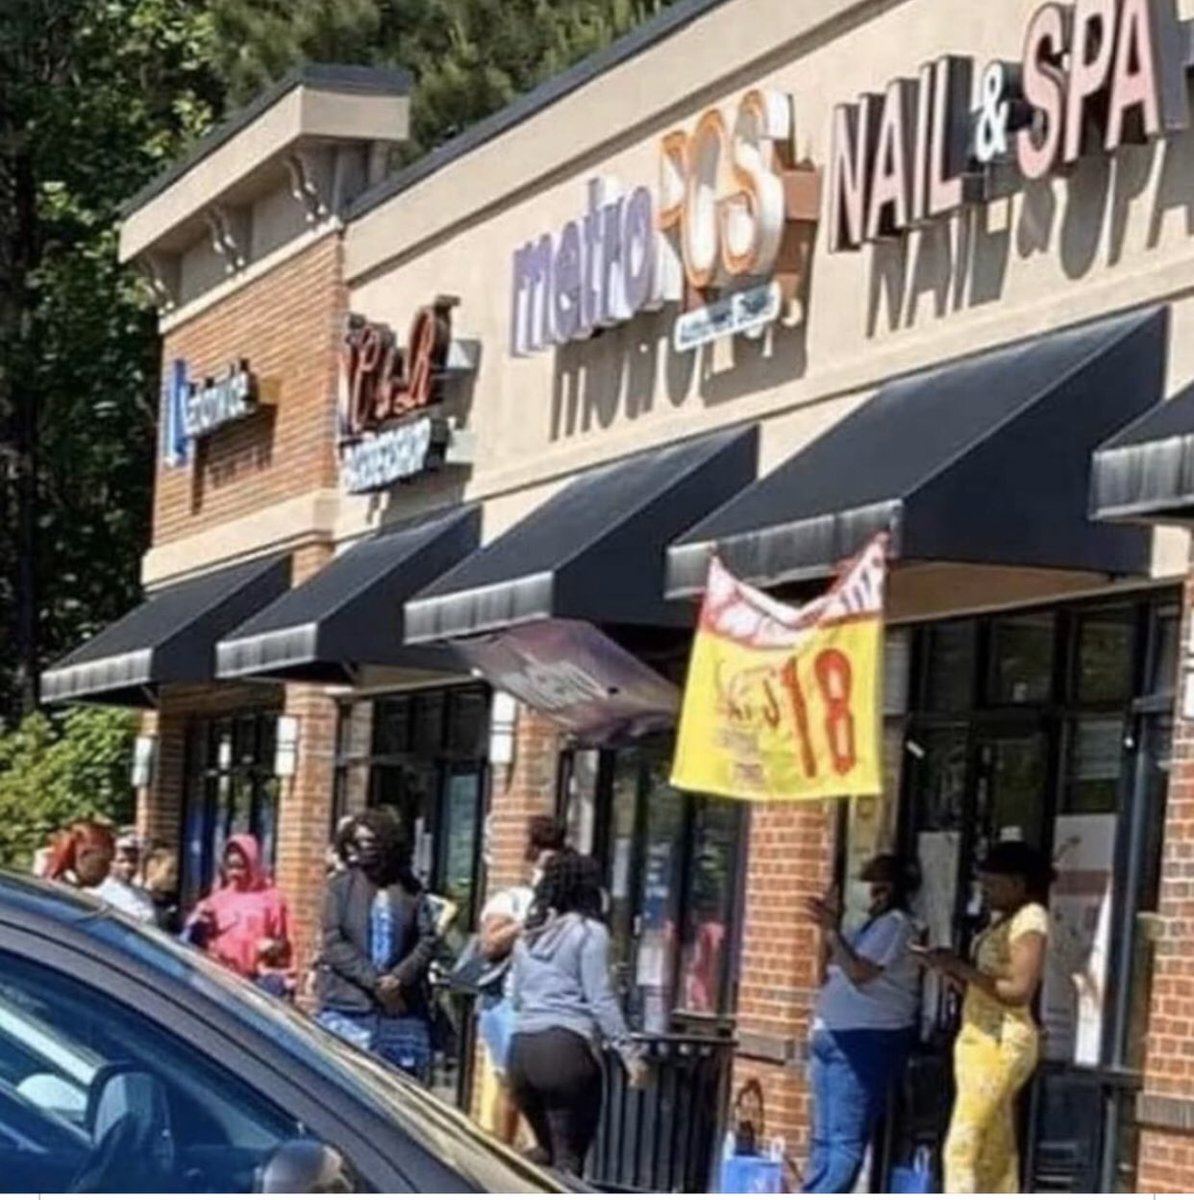 Black women what up?? Atlanta open up nail shops & beauty supplies & this? What is it about these damn Asian businesses that y’all can’t stay out of them? These people have shown nothing but disdain and hate towards blks, they kicking blks out of businesses in China